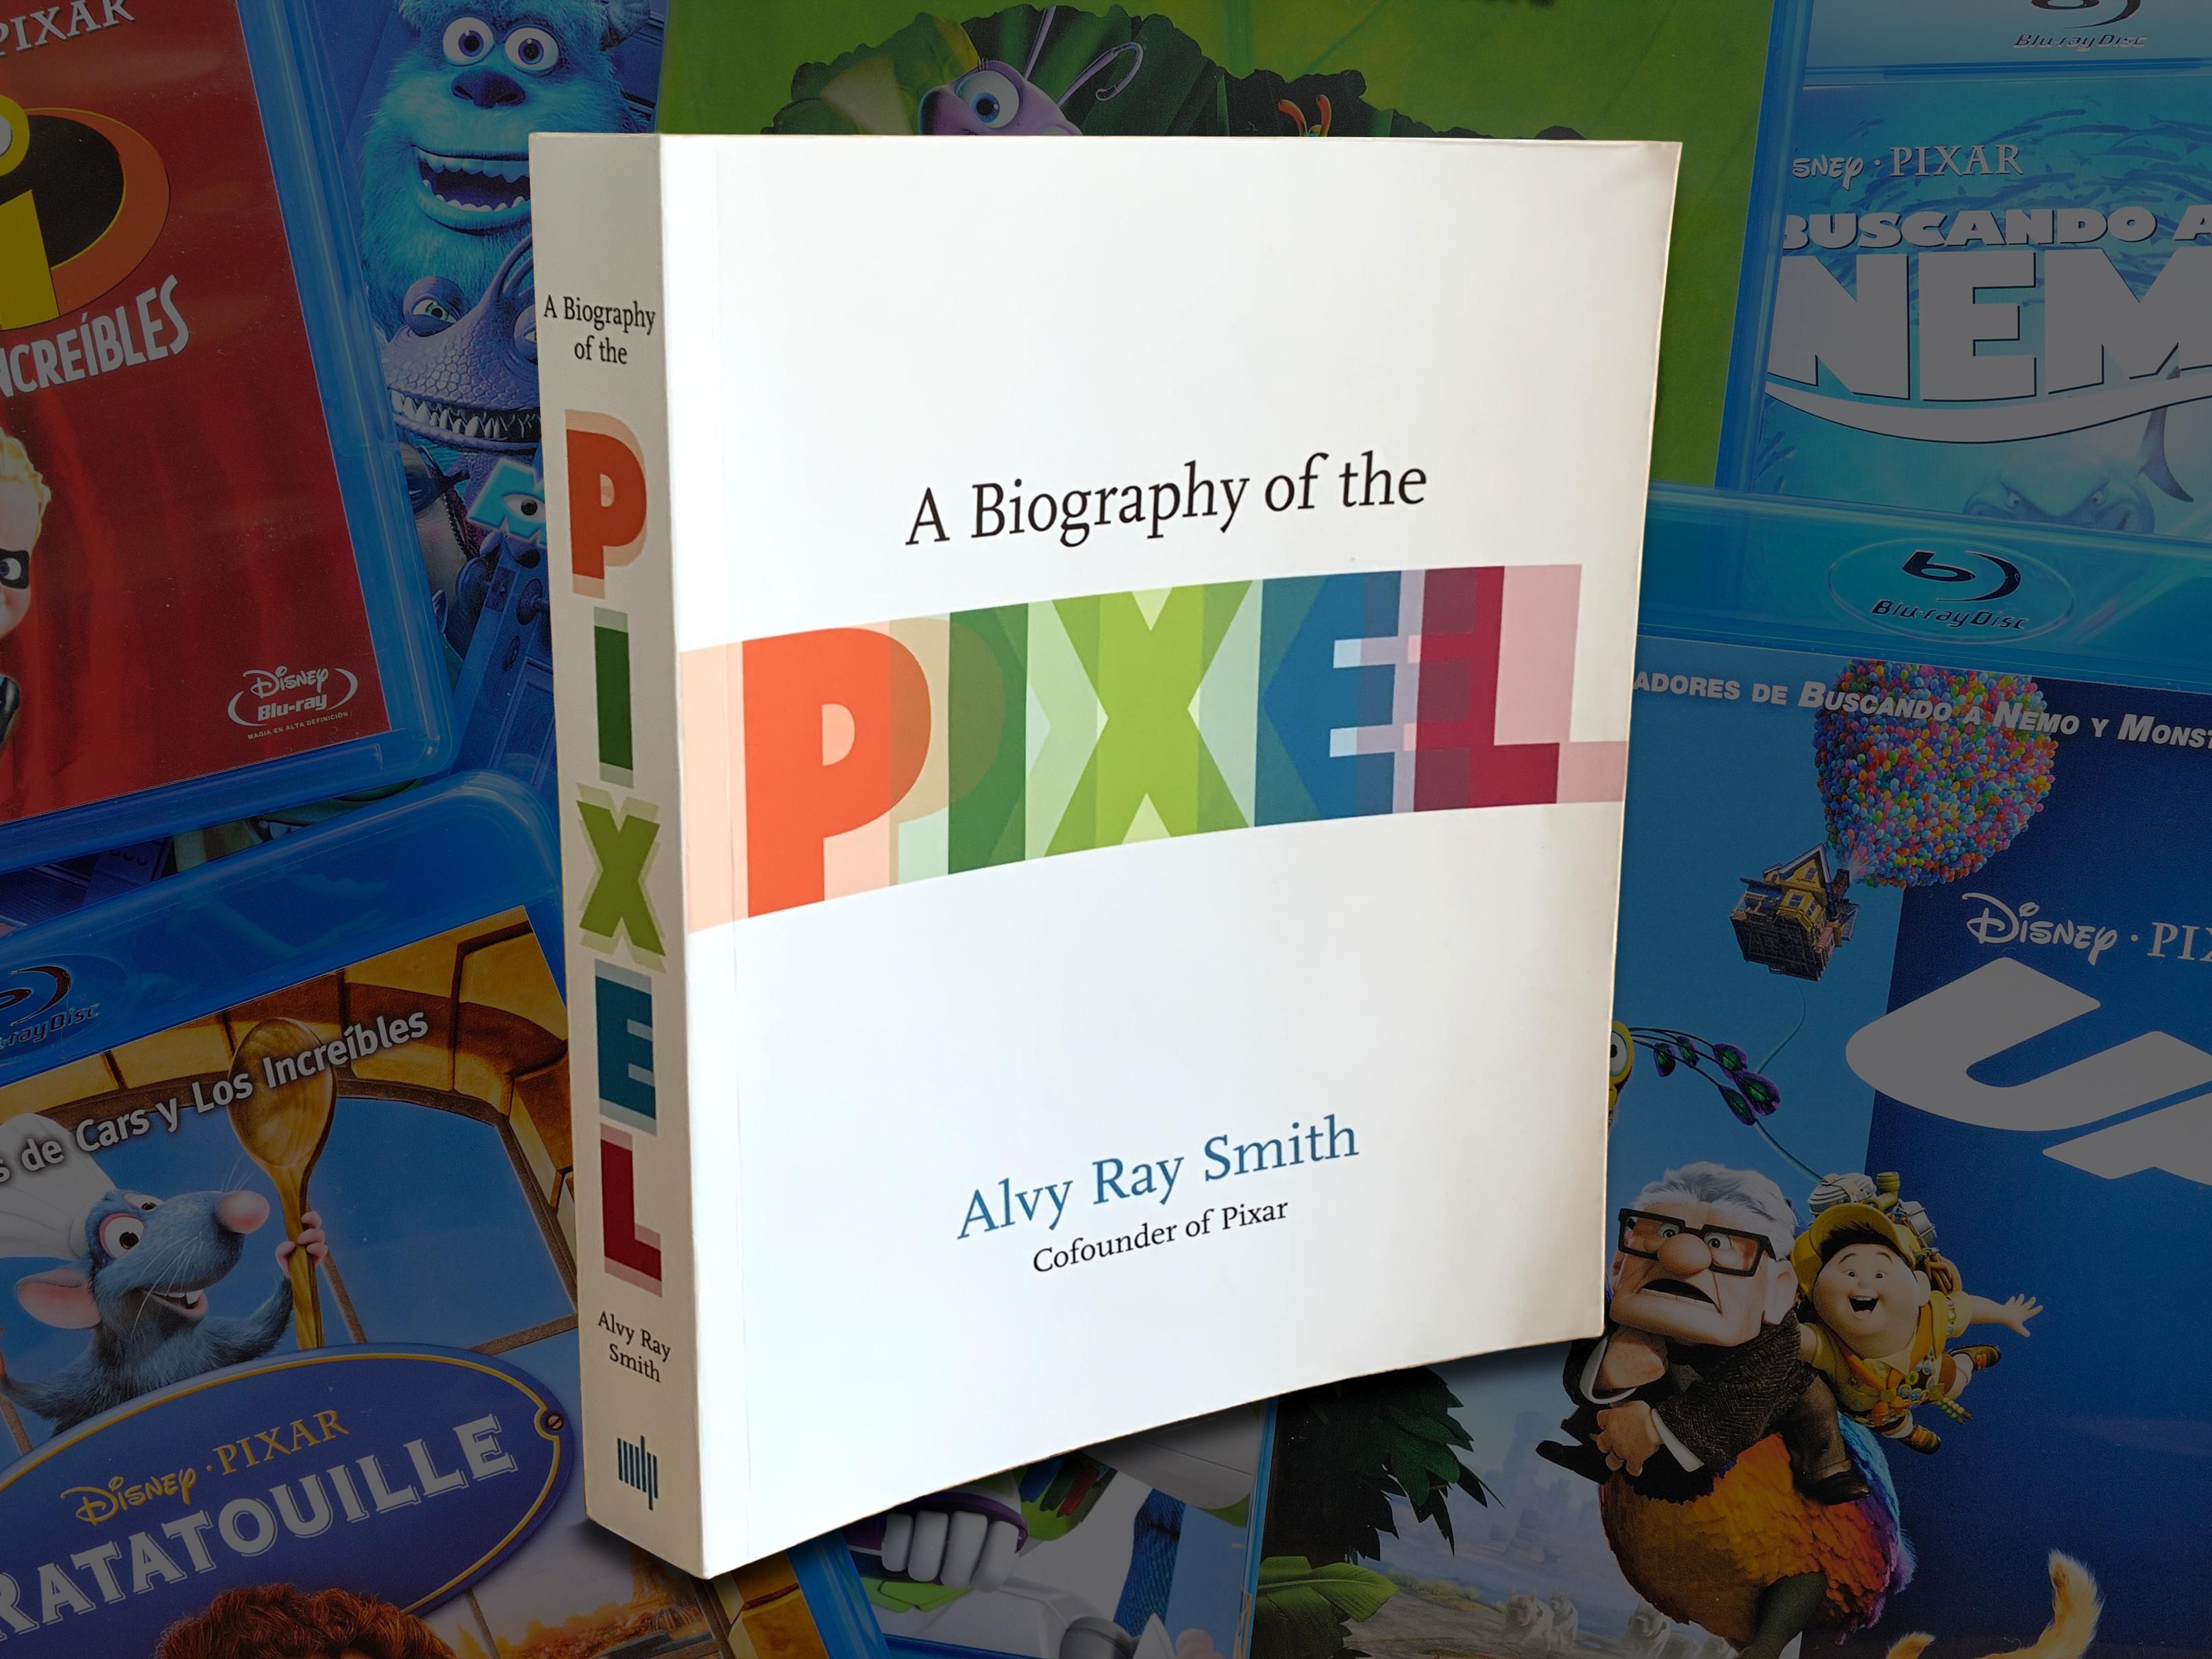 The book A Biography of the Pixel by Alvy Ray Smith atop a background of Pixar Blu-Ray cases